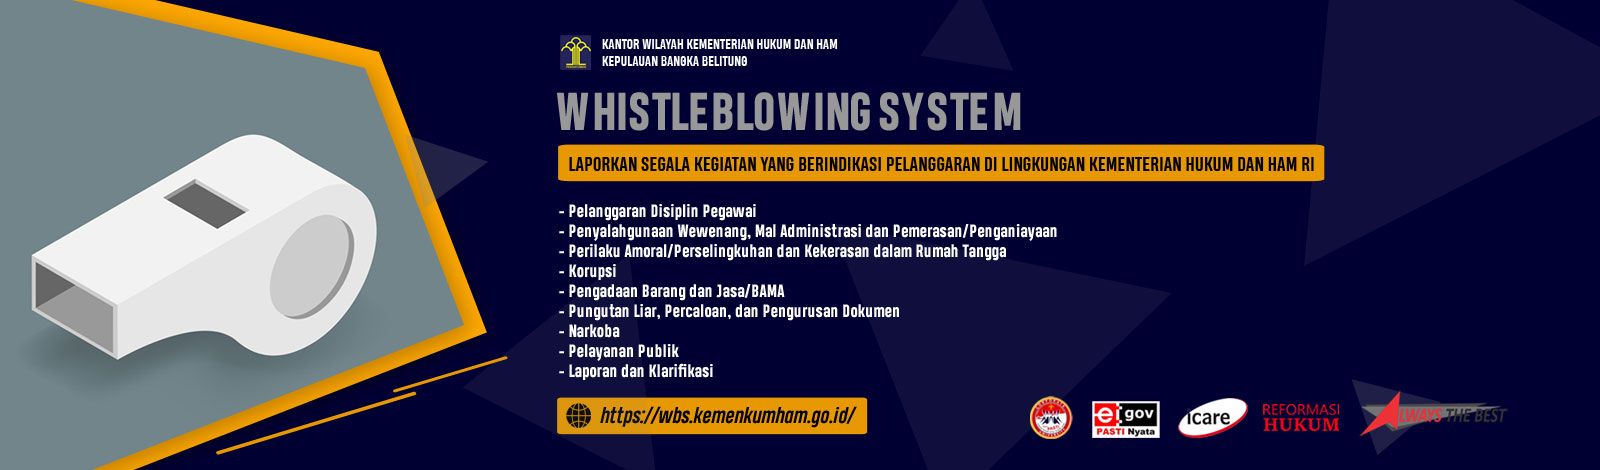 Whistleblowing_system